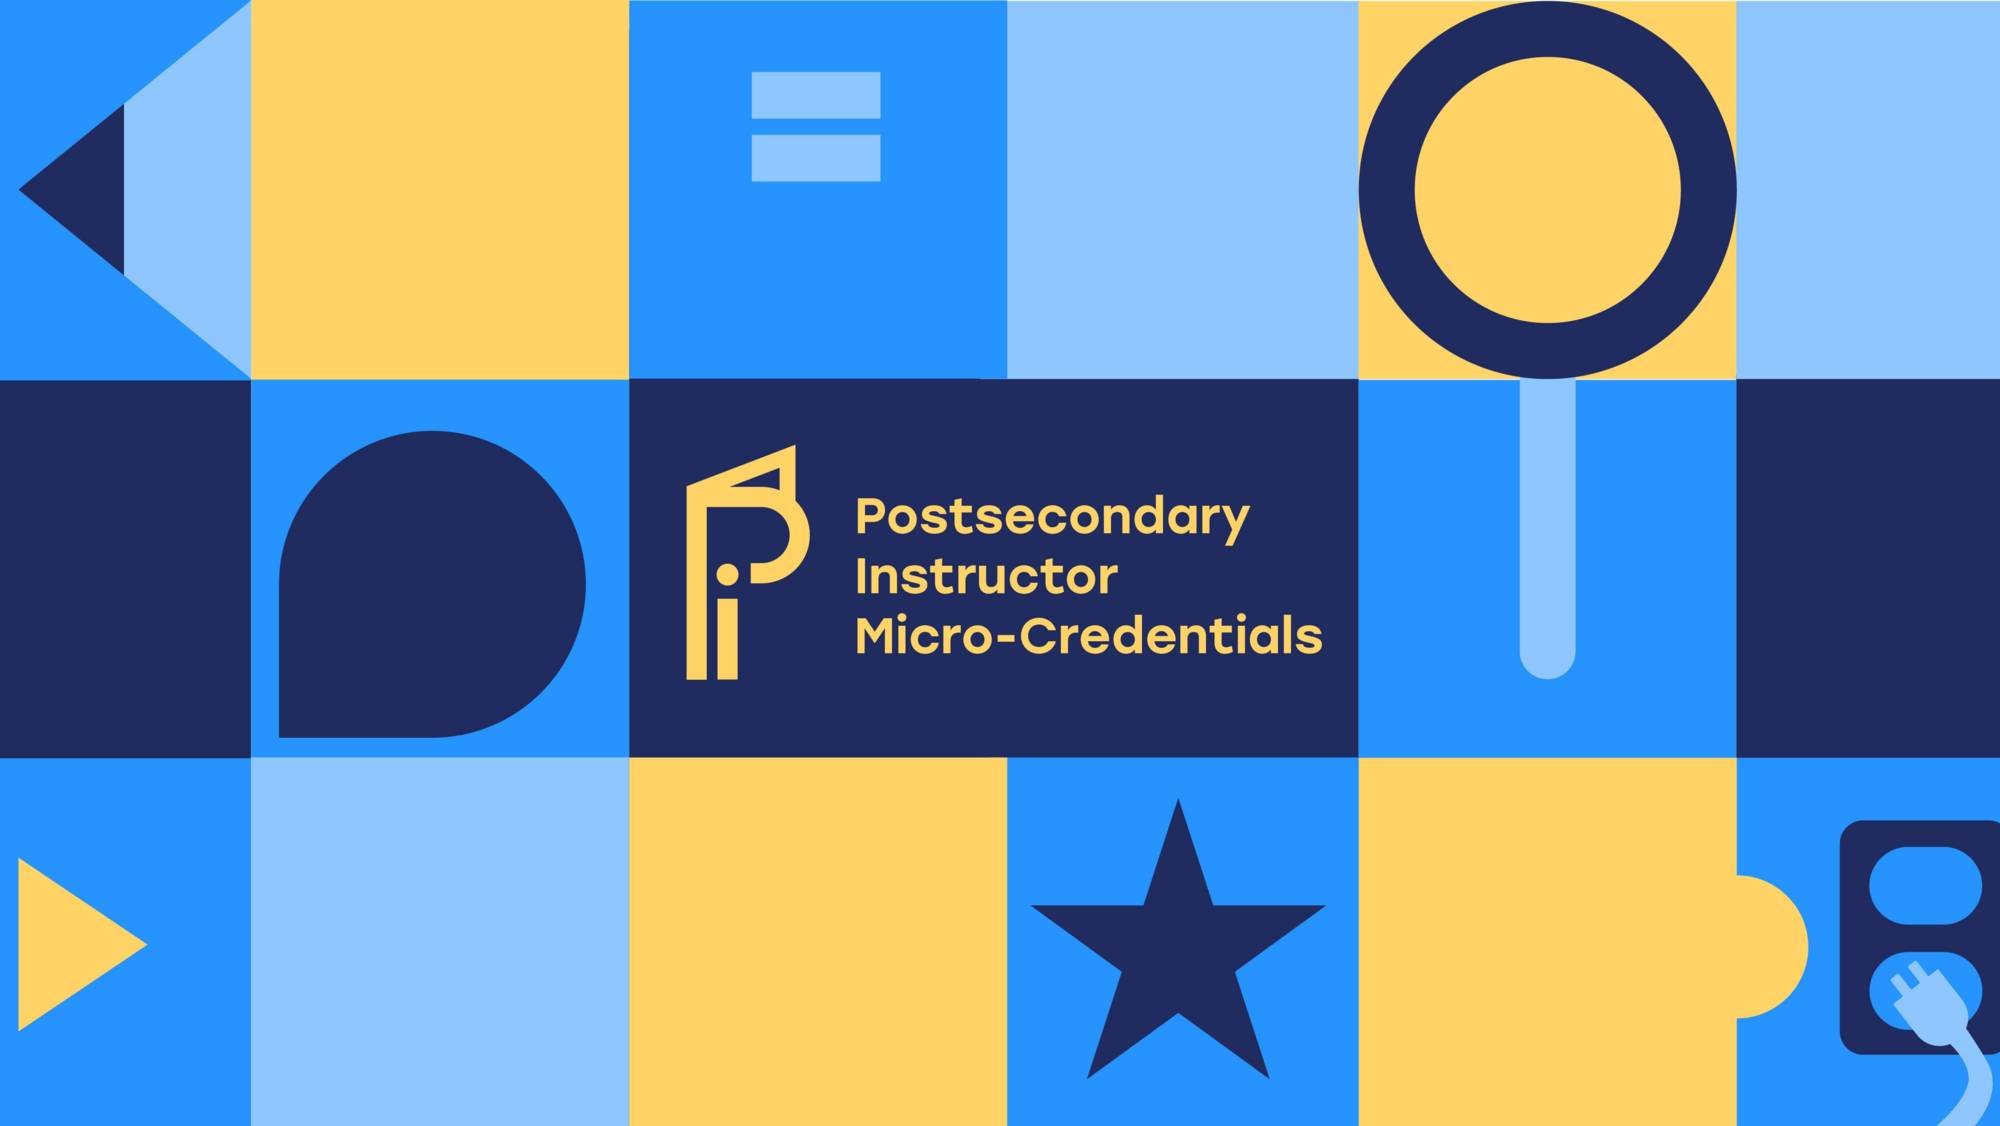 Pim logo and title: Post Secondary Micro Credentials